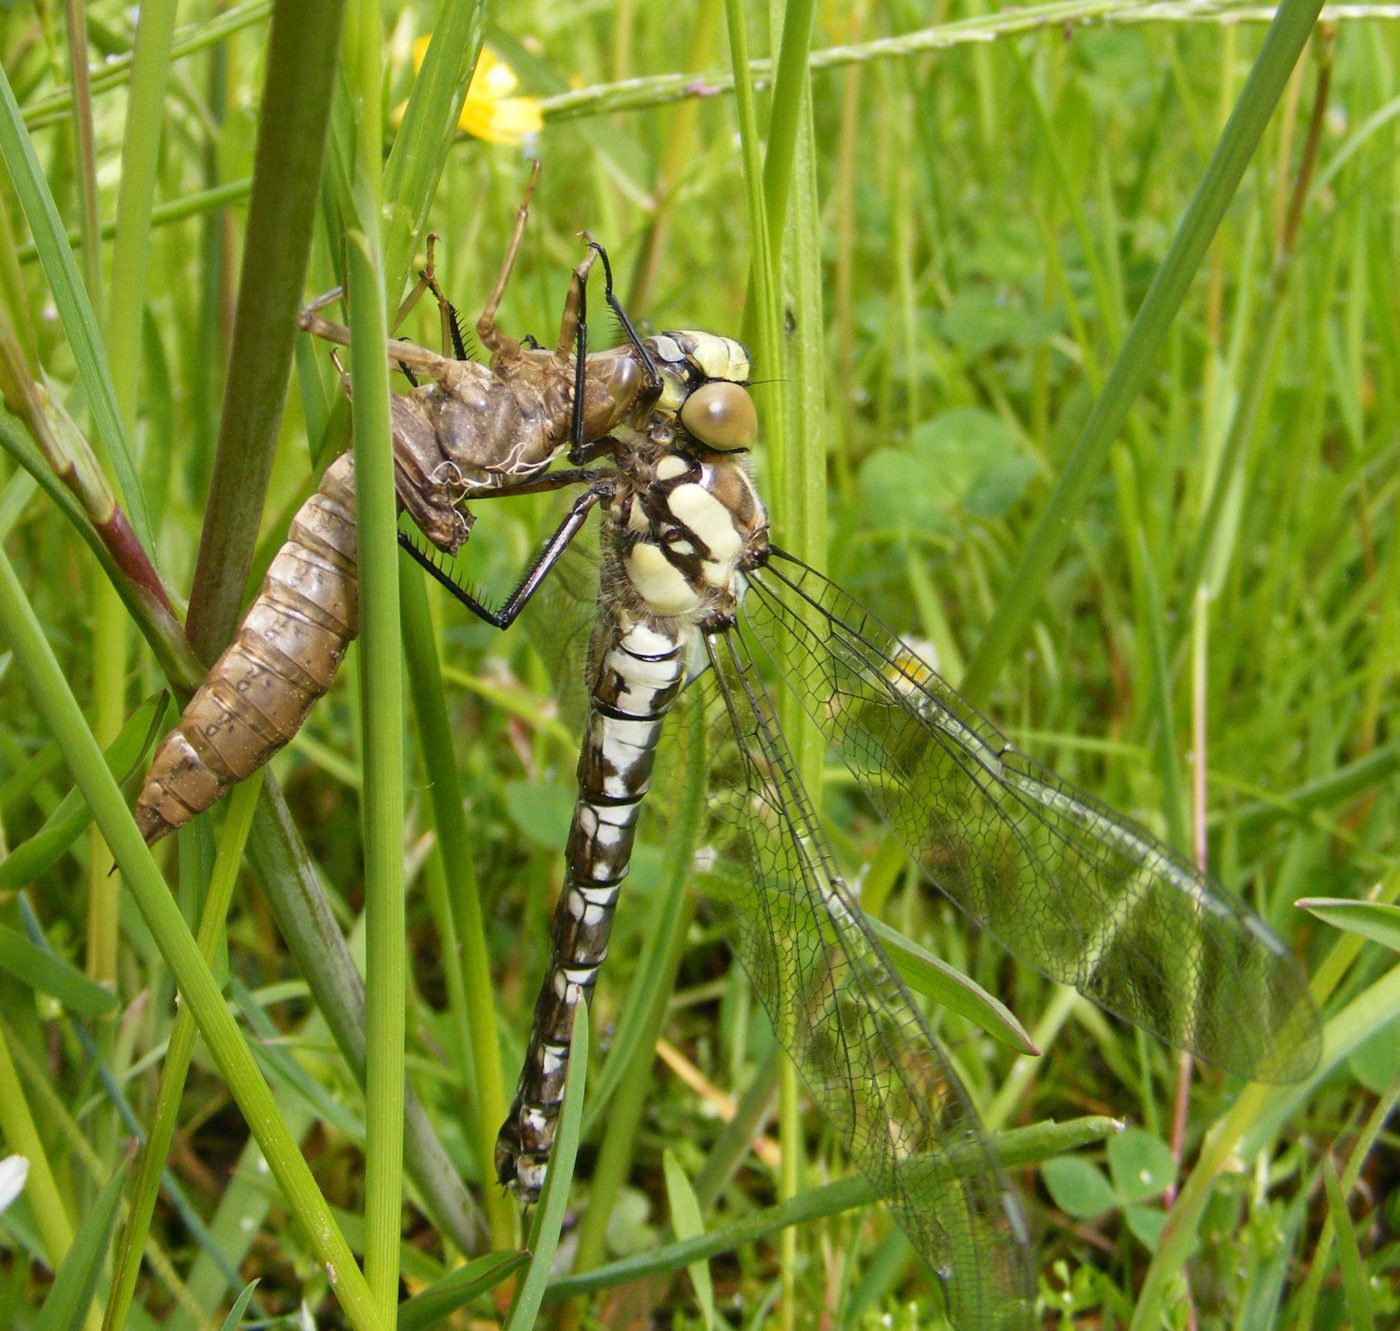 Dragonfly ready for take-off